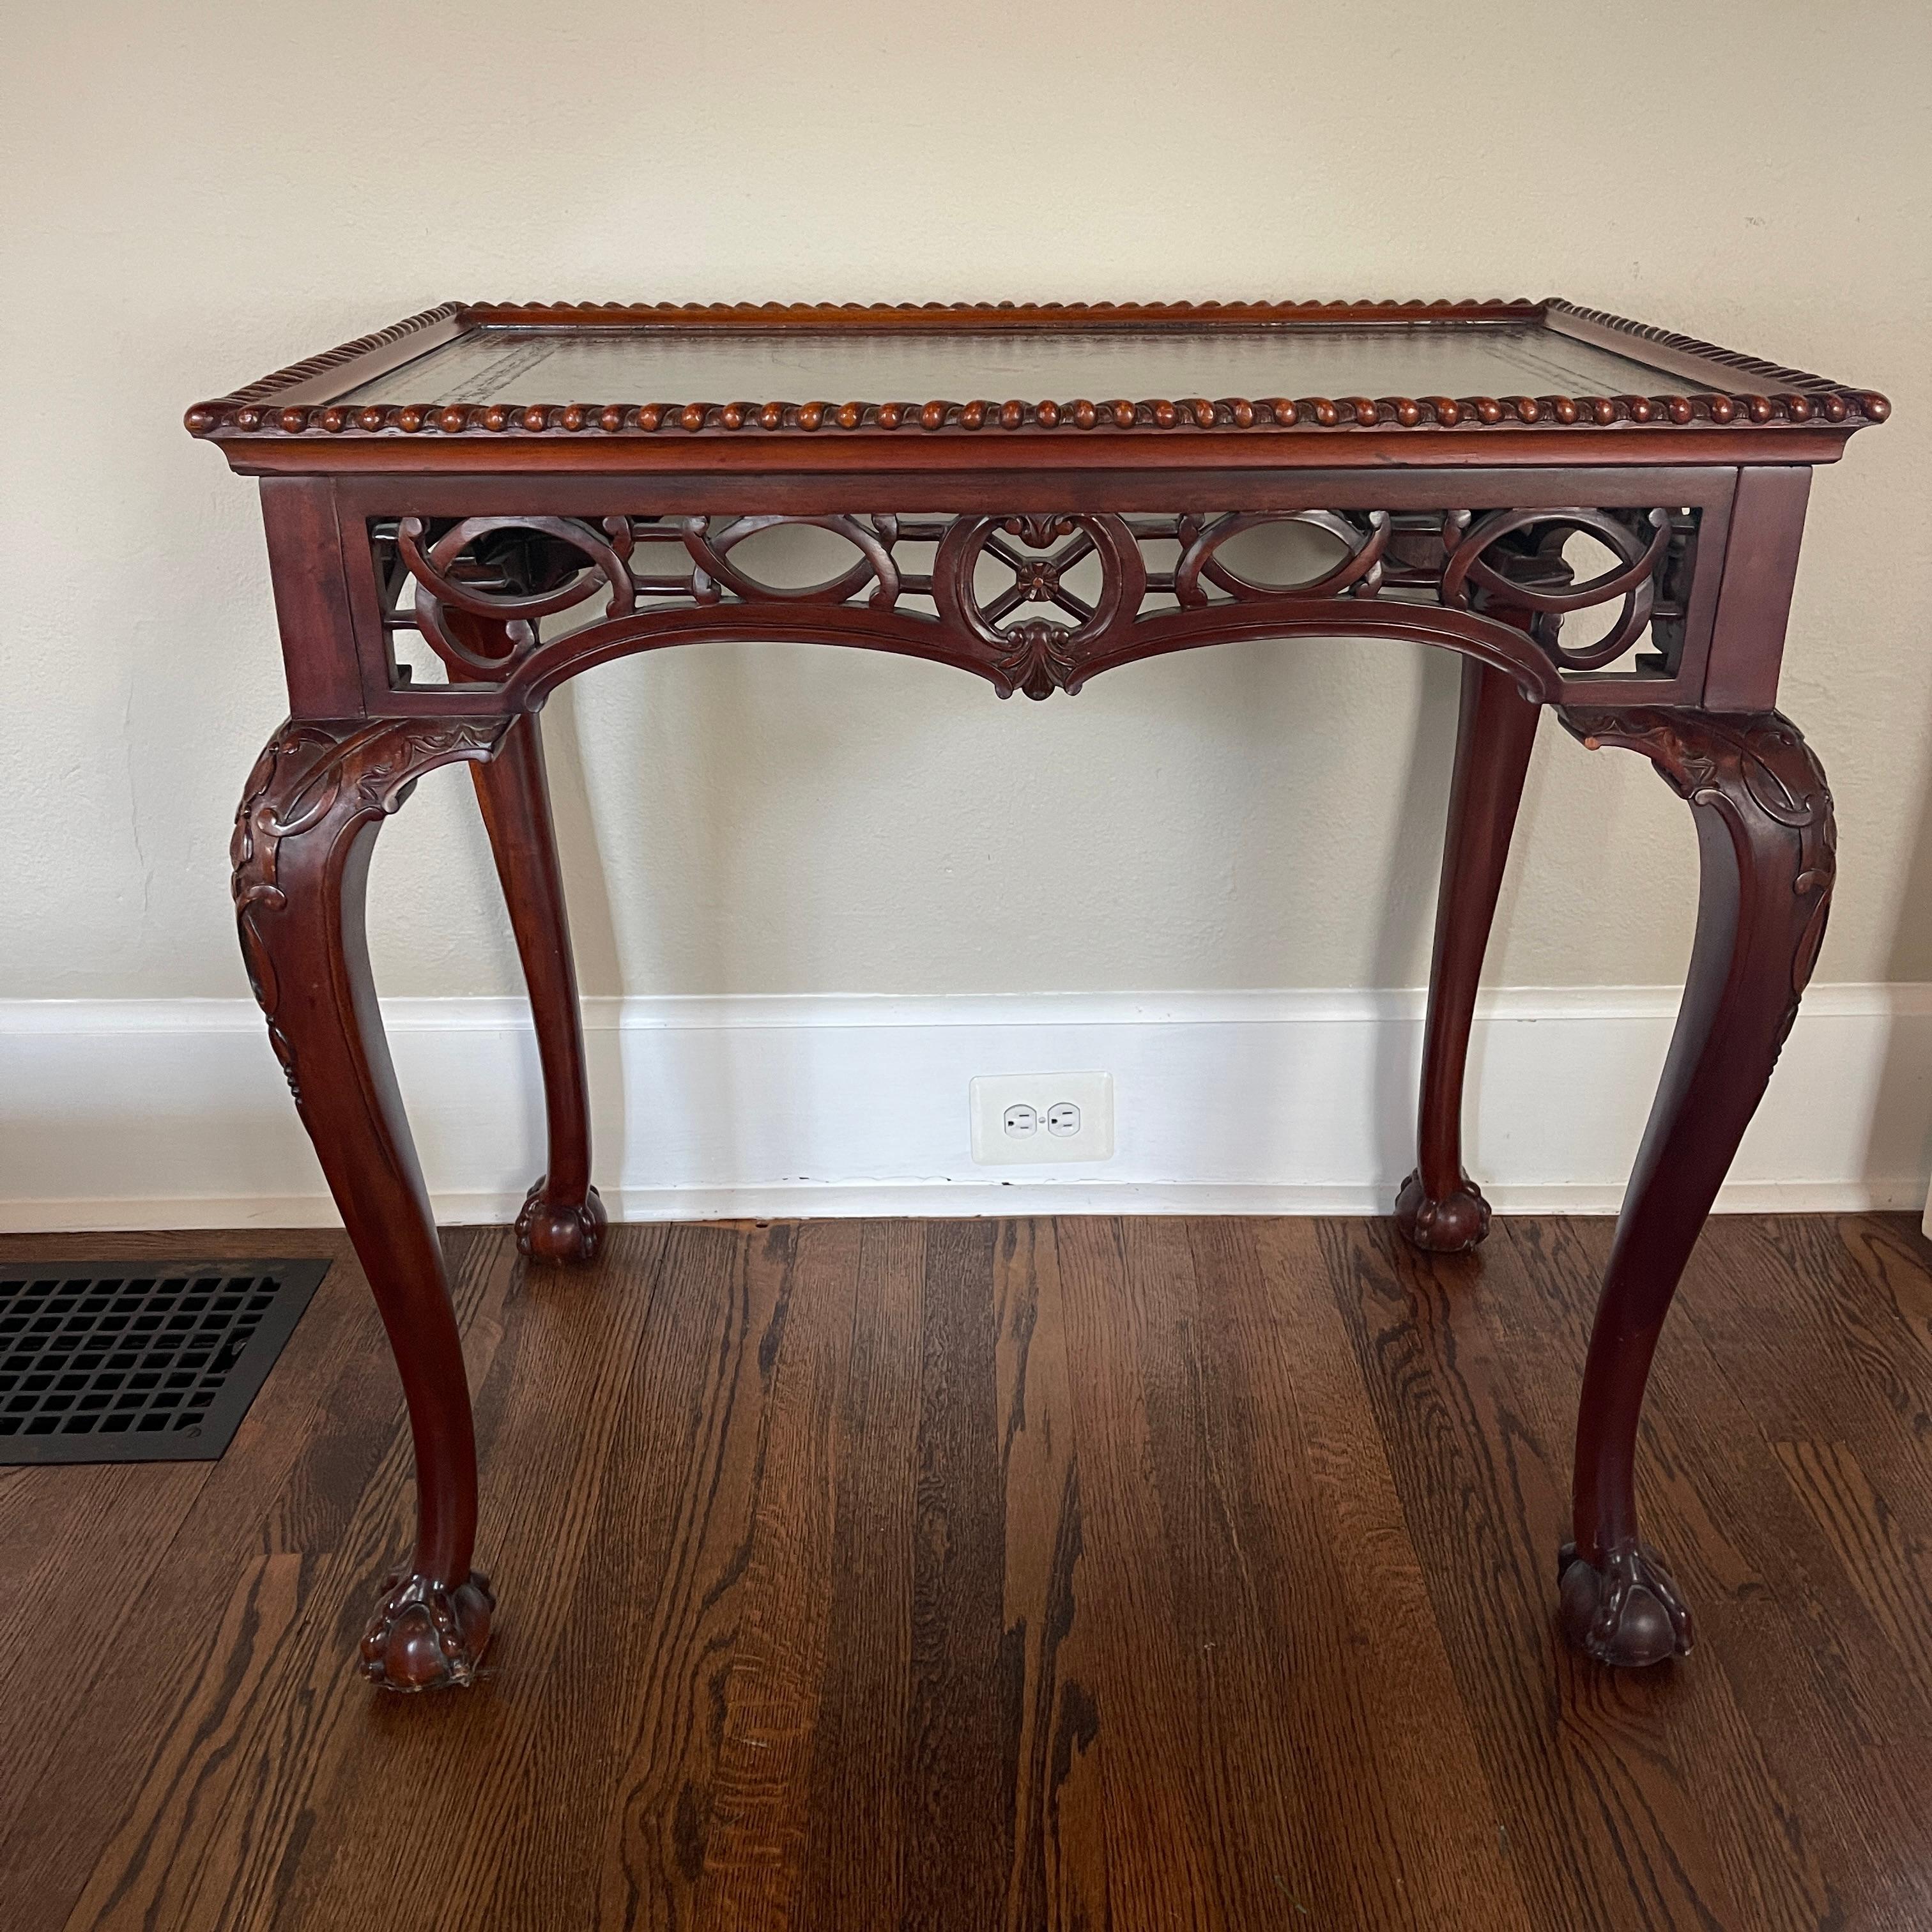 In the style of classic 19th century Thomas Chippendale Fret work carved end table. This lovely table is perfect as an end table or side table by a sofa or chair. The inlay leather top is in good condition with center medallion design. The carved